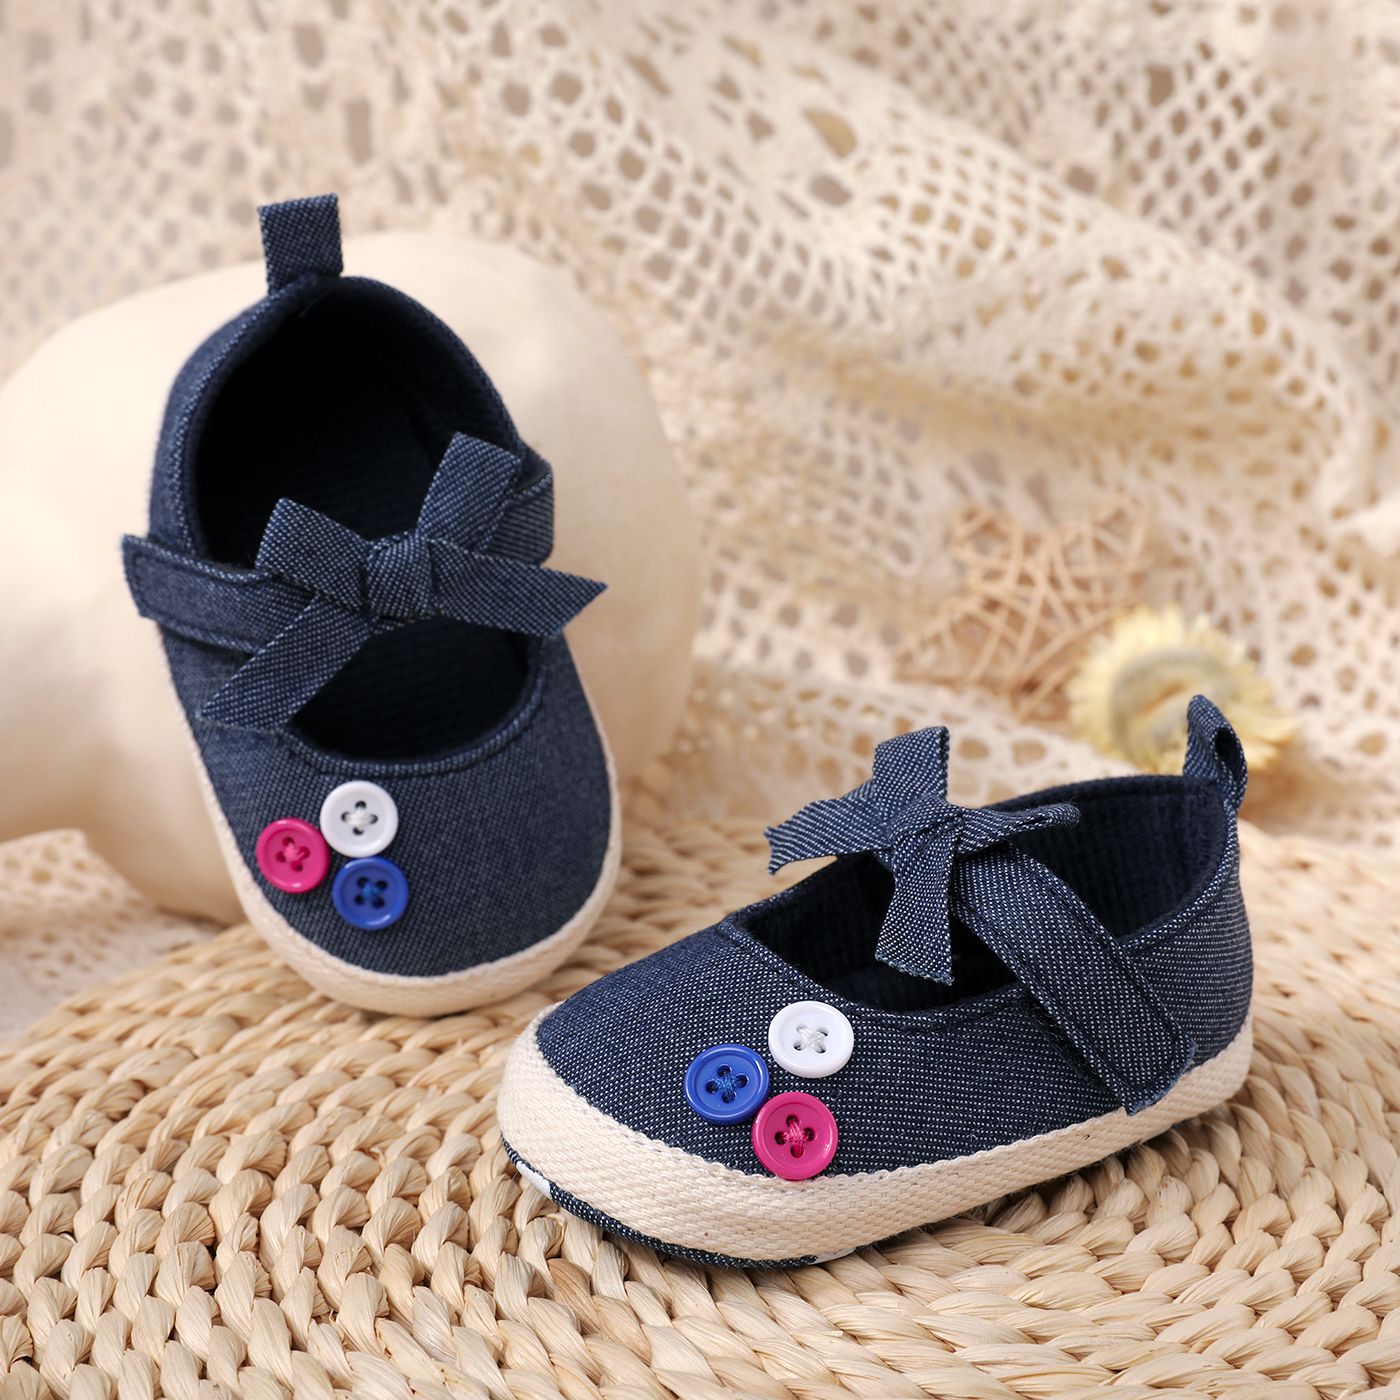 

Baby Bow & Buttons Decor Polka Dots Soft Sole Prewalker Shoes